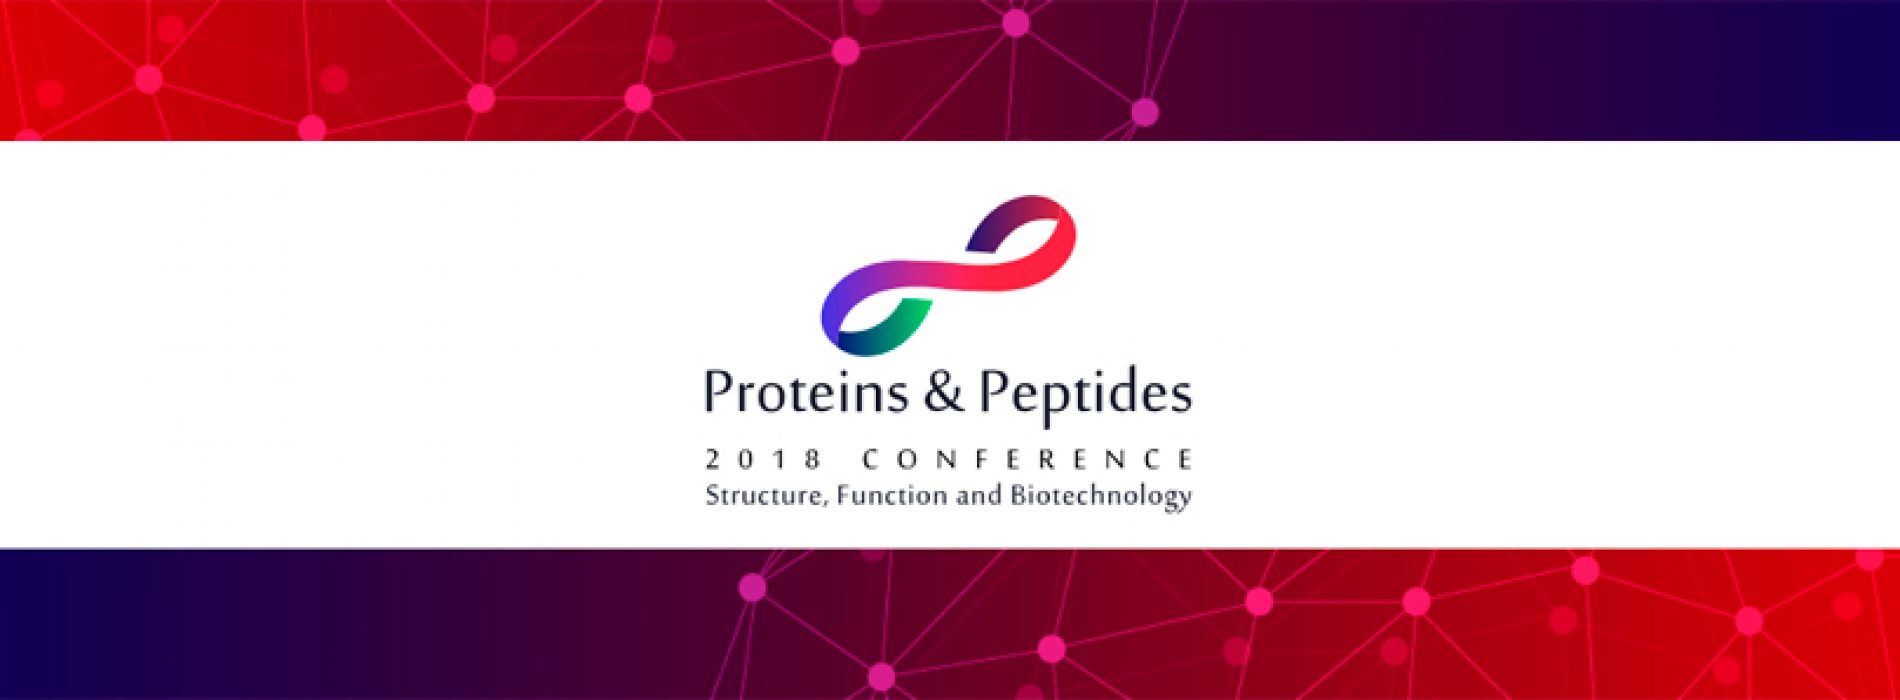 Proteins & Peptides